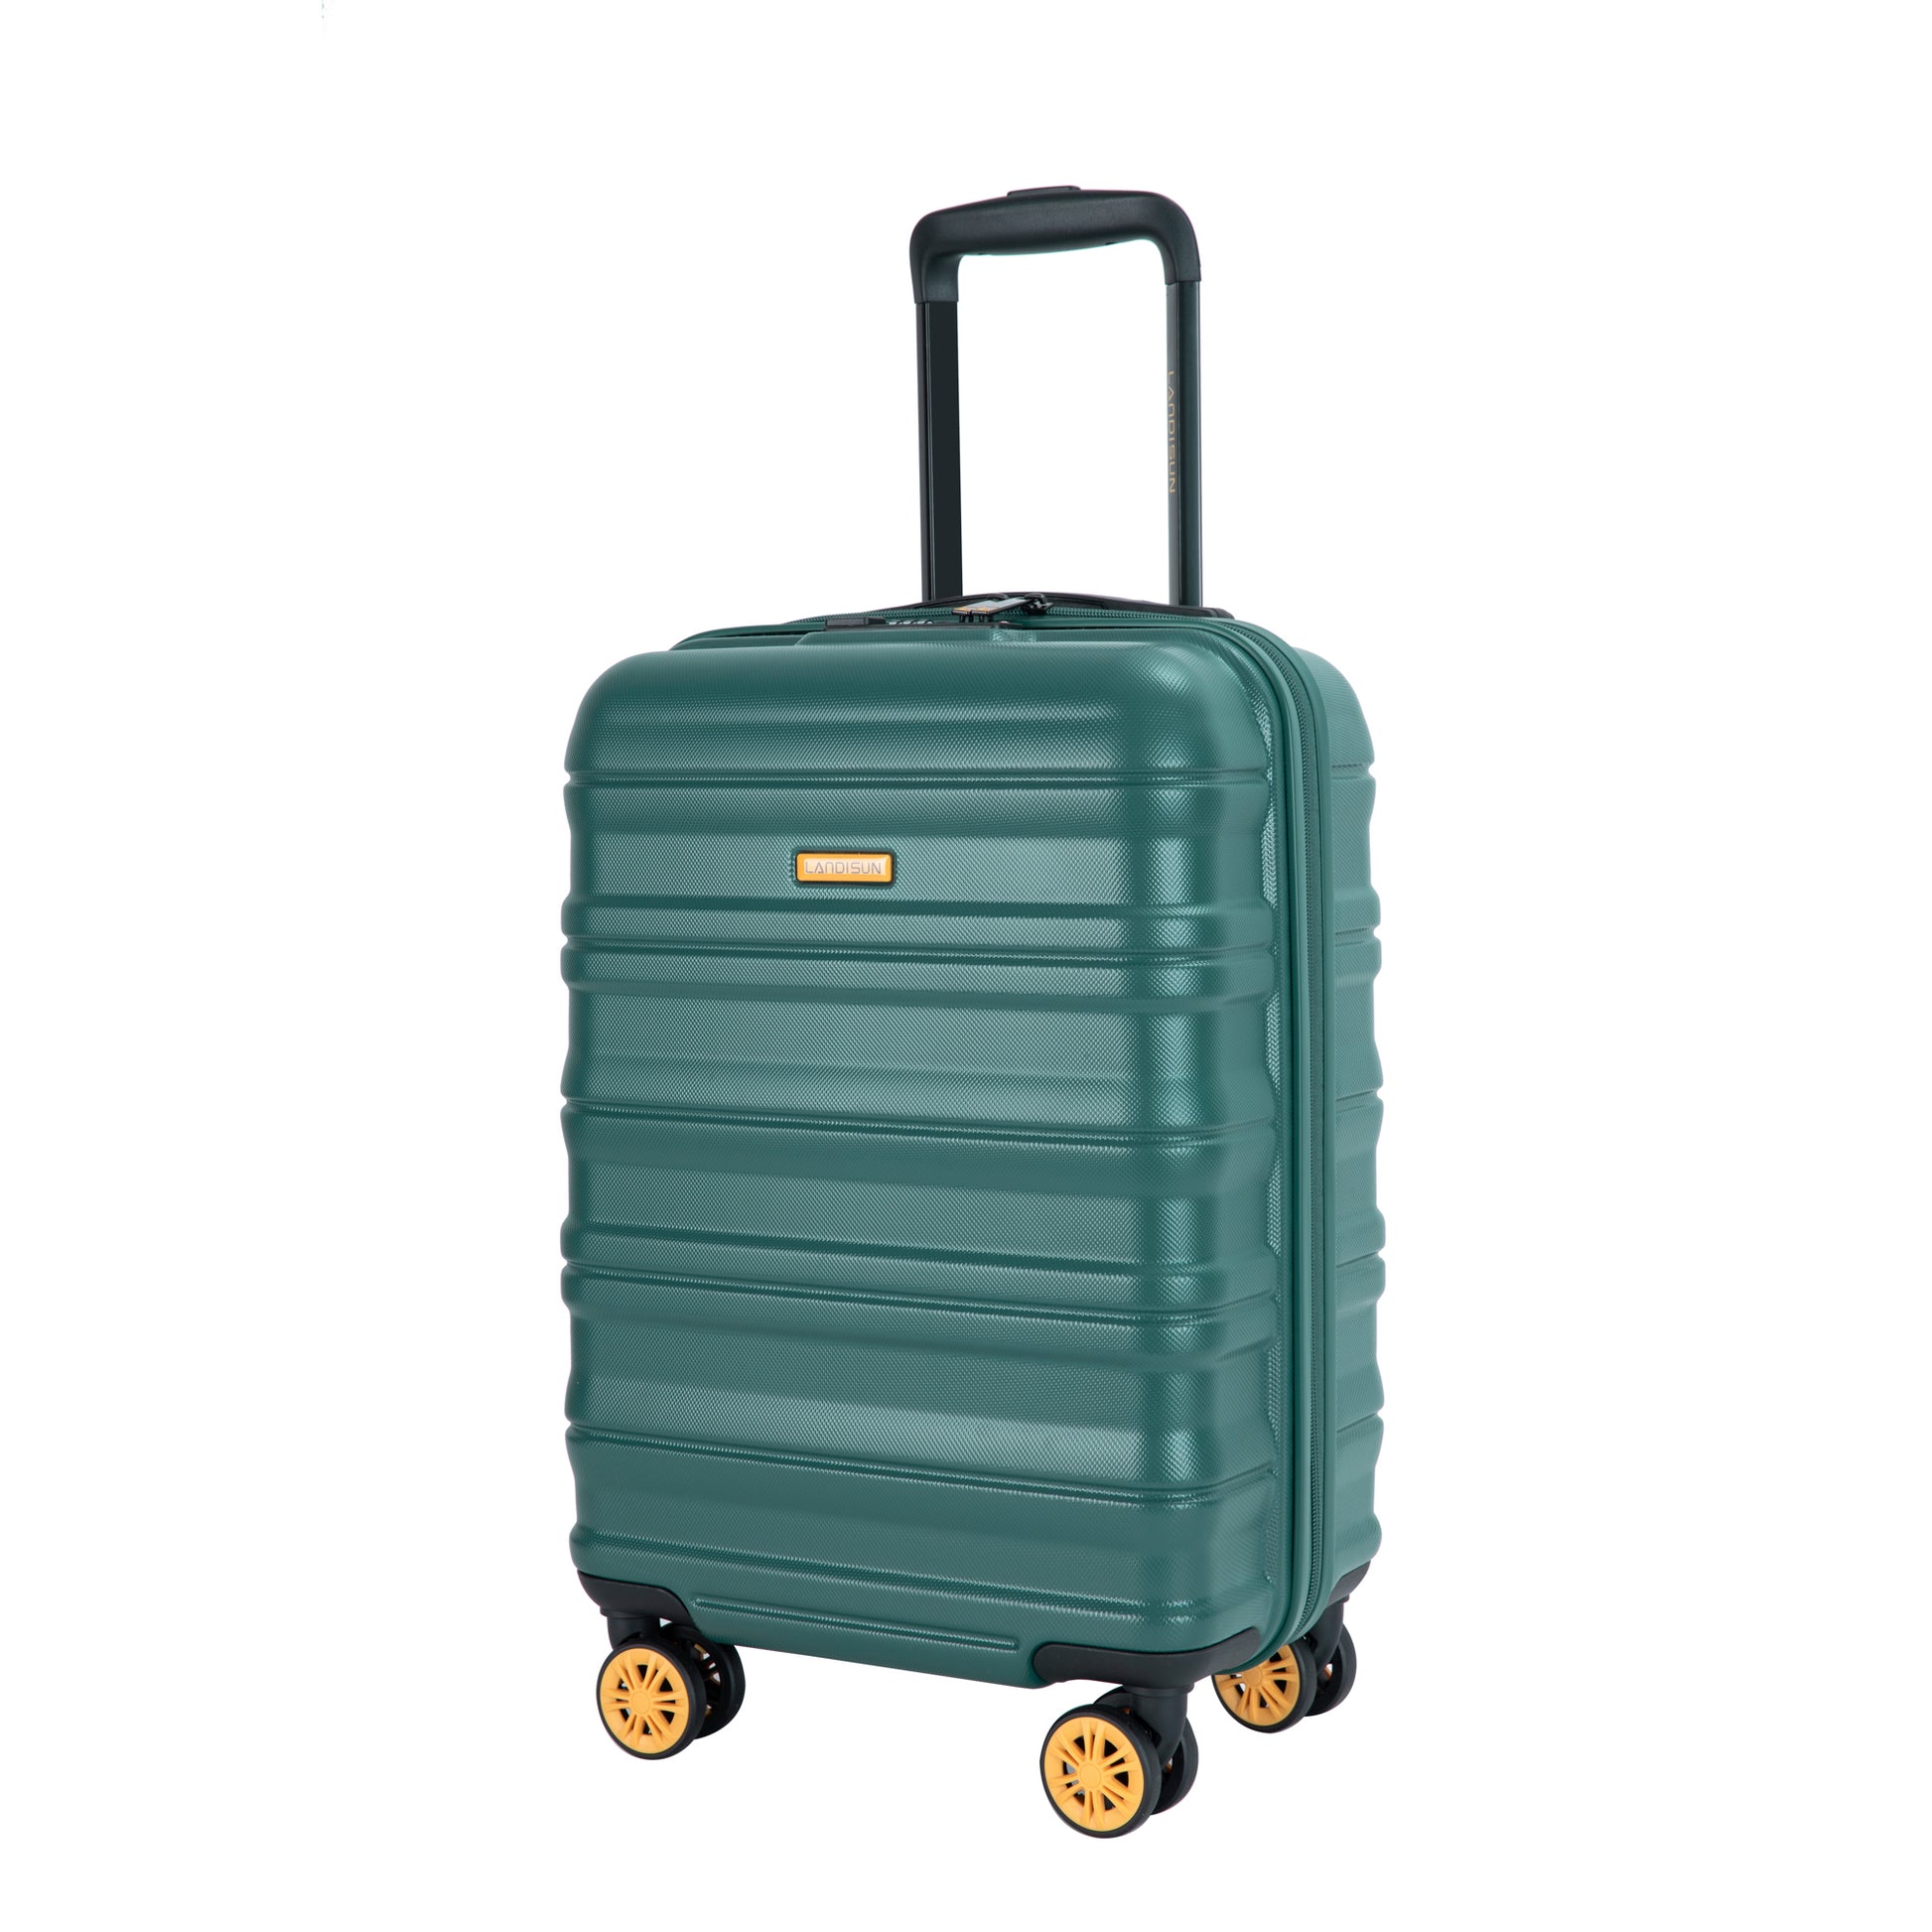 Carry On Luggage Airline Approved18.5" Carry On dark green-abs+pc